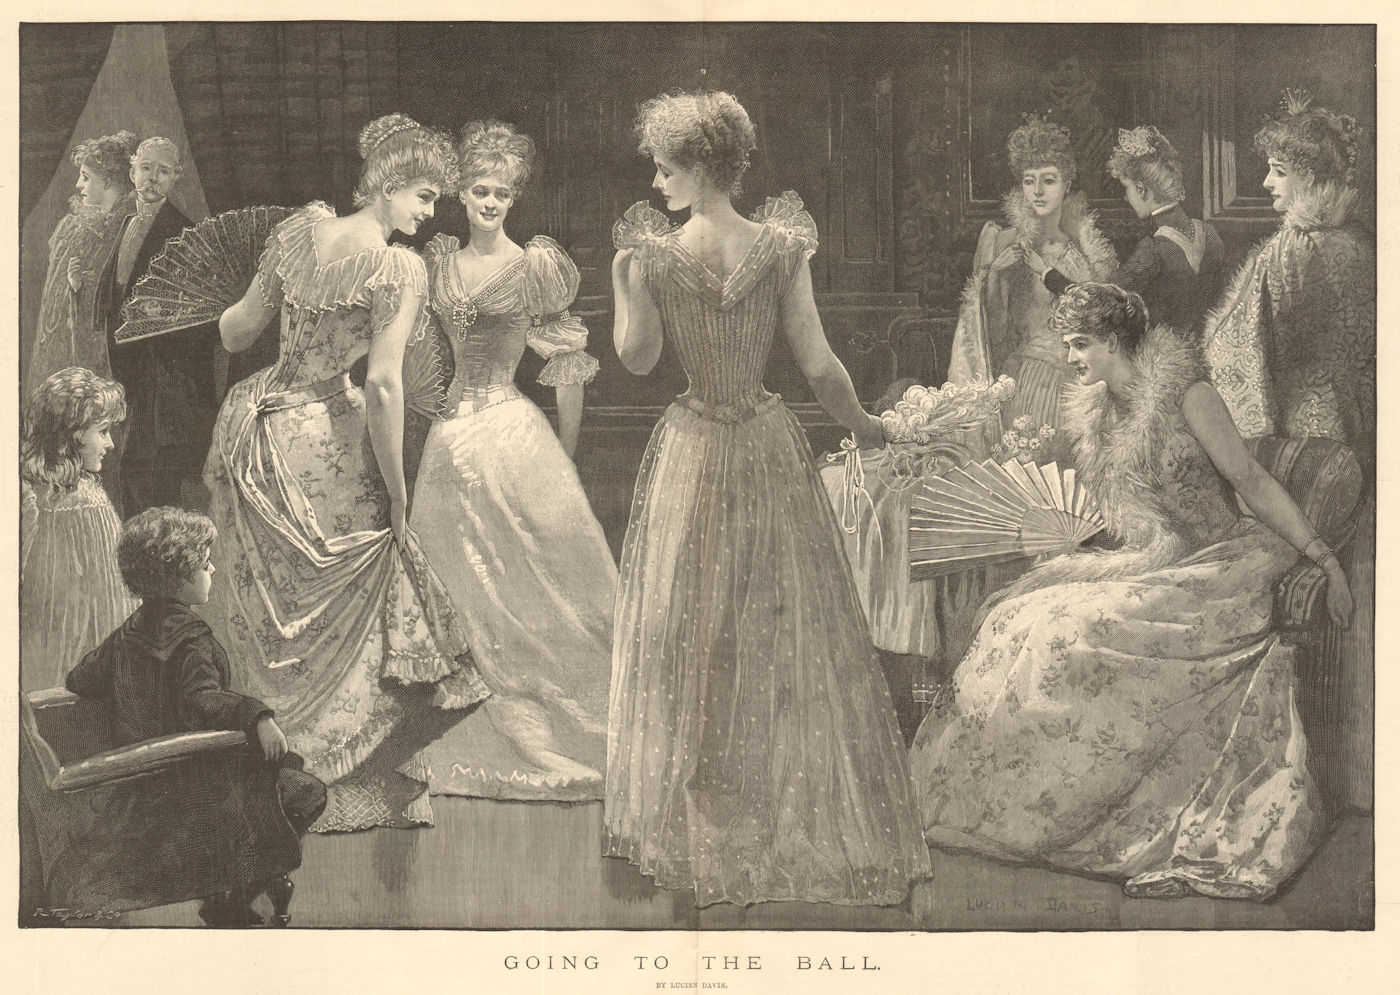 "Going to the ball", by Lucien Davis. Fine Arts. Society 1892 old print